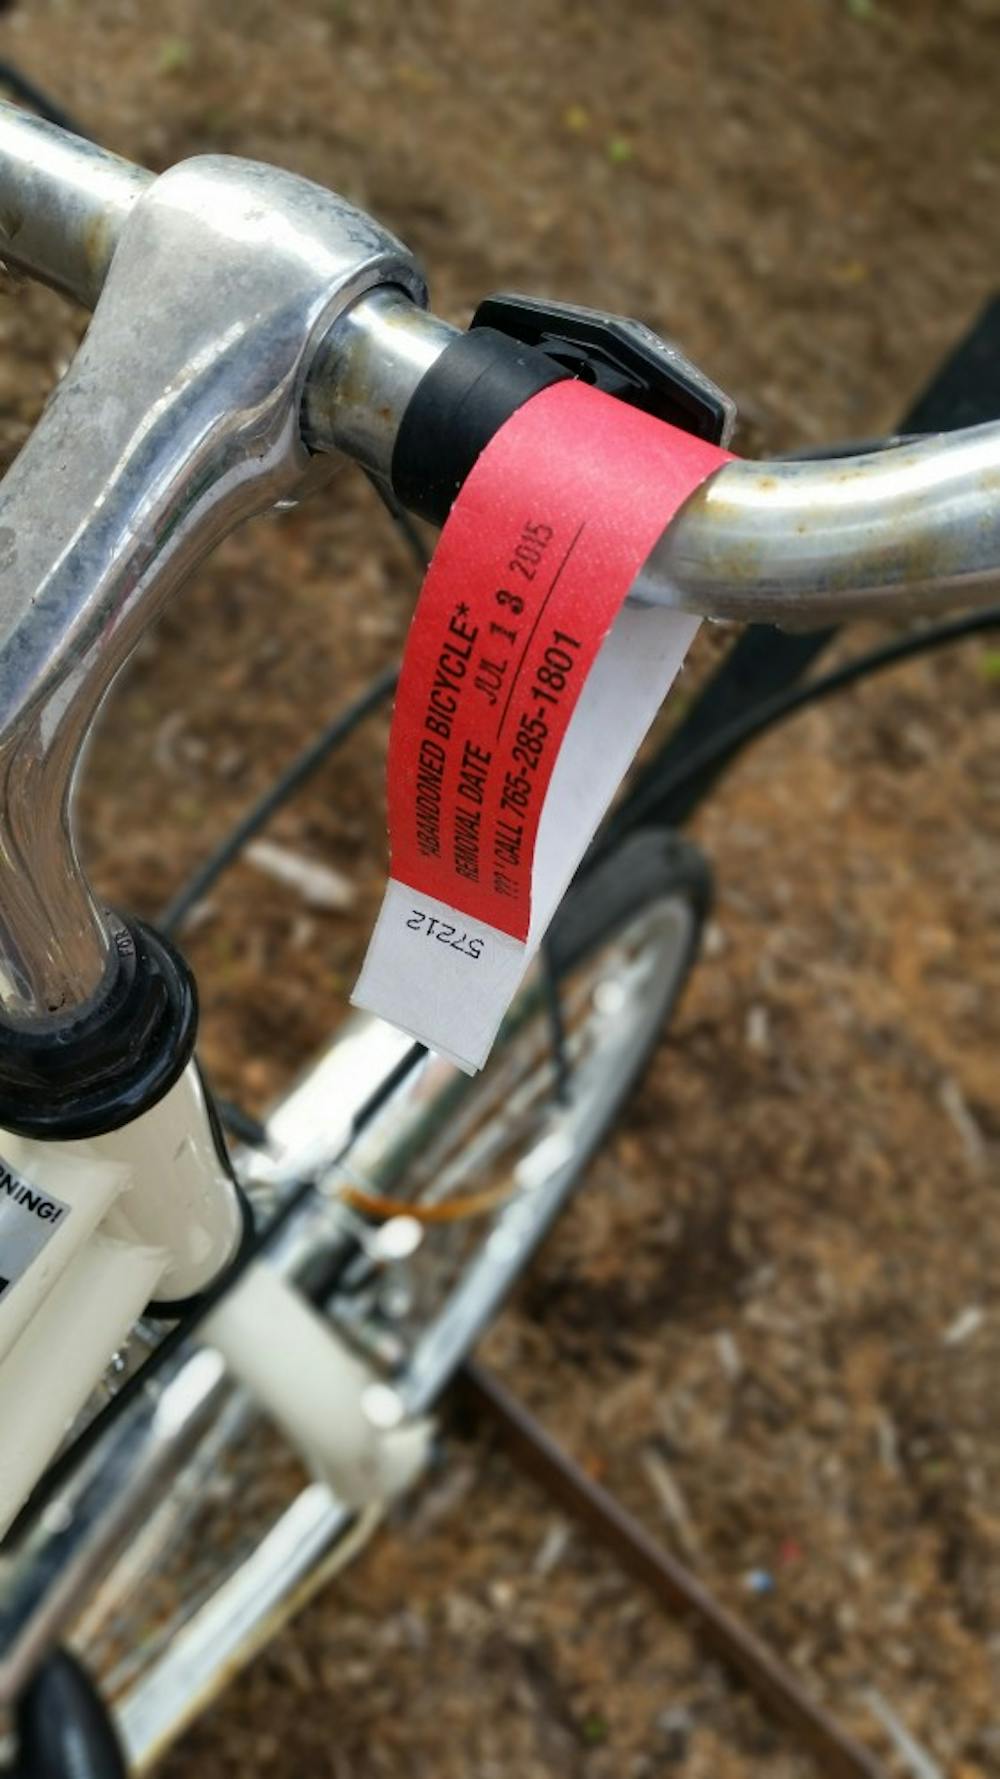 Purchasing Services begins tagging bikes left on campus for removal 